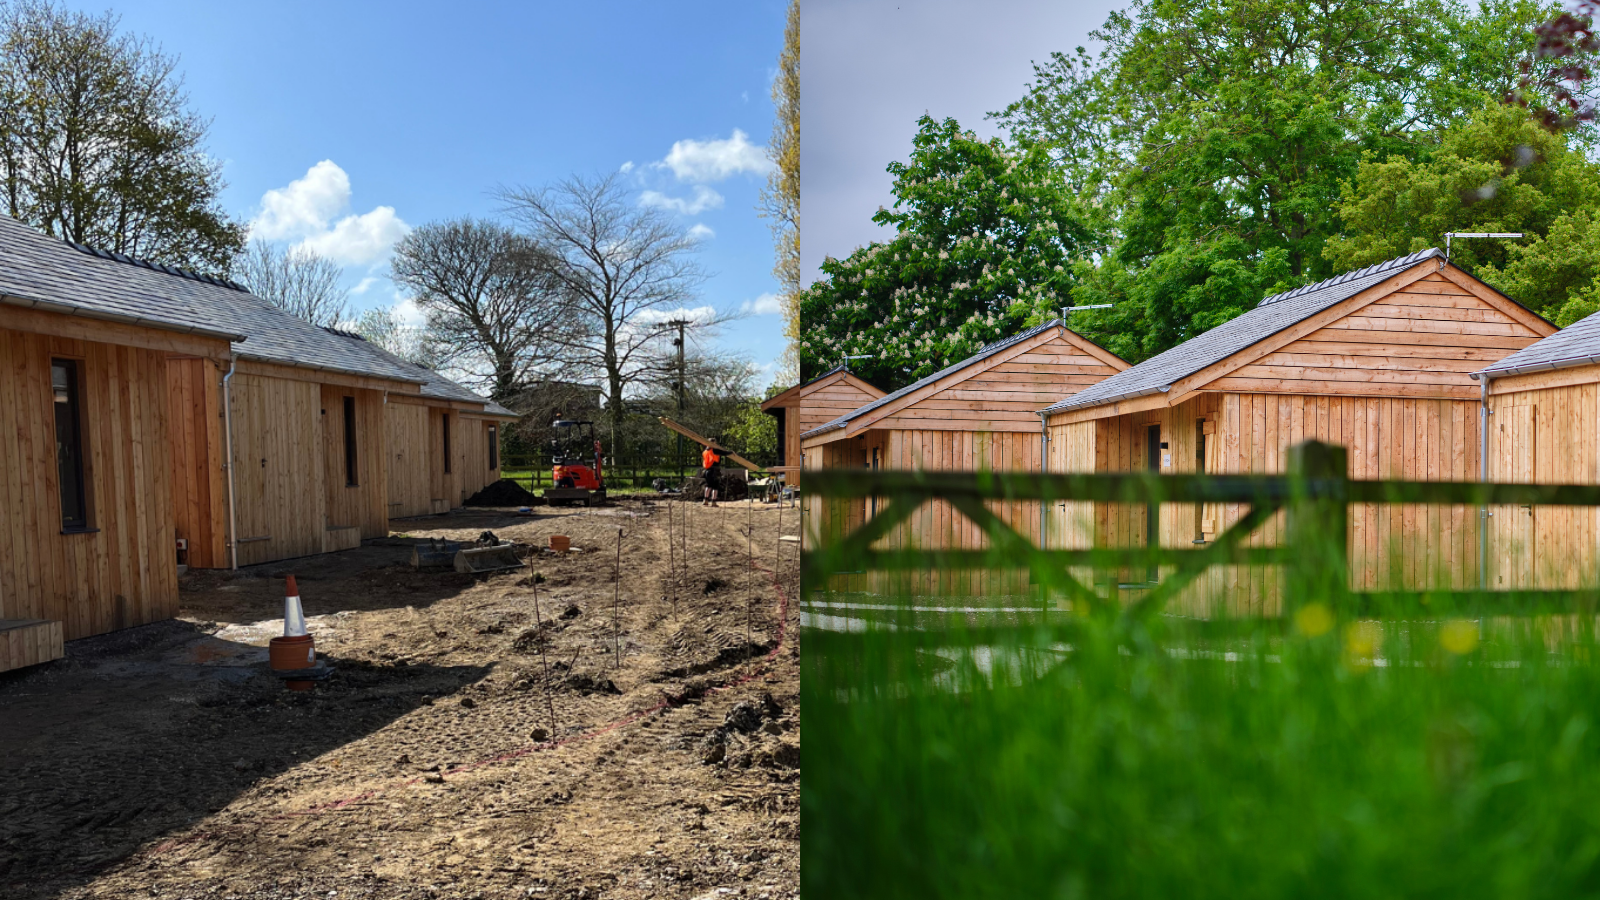 A side by side photo showing before and after the lodges were built